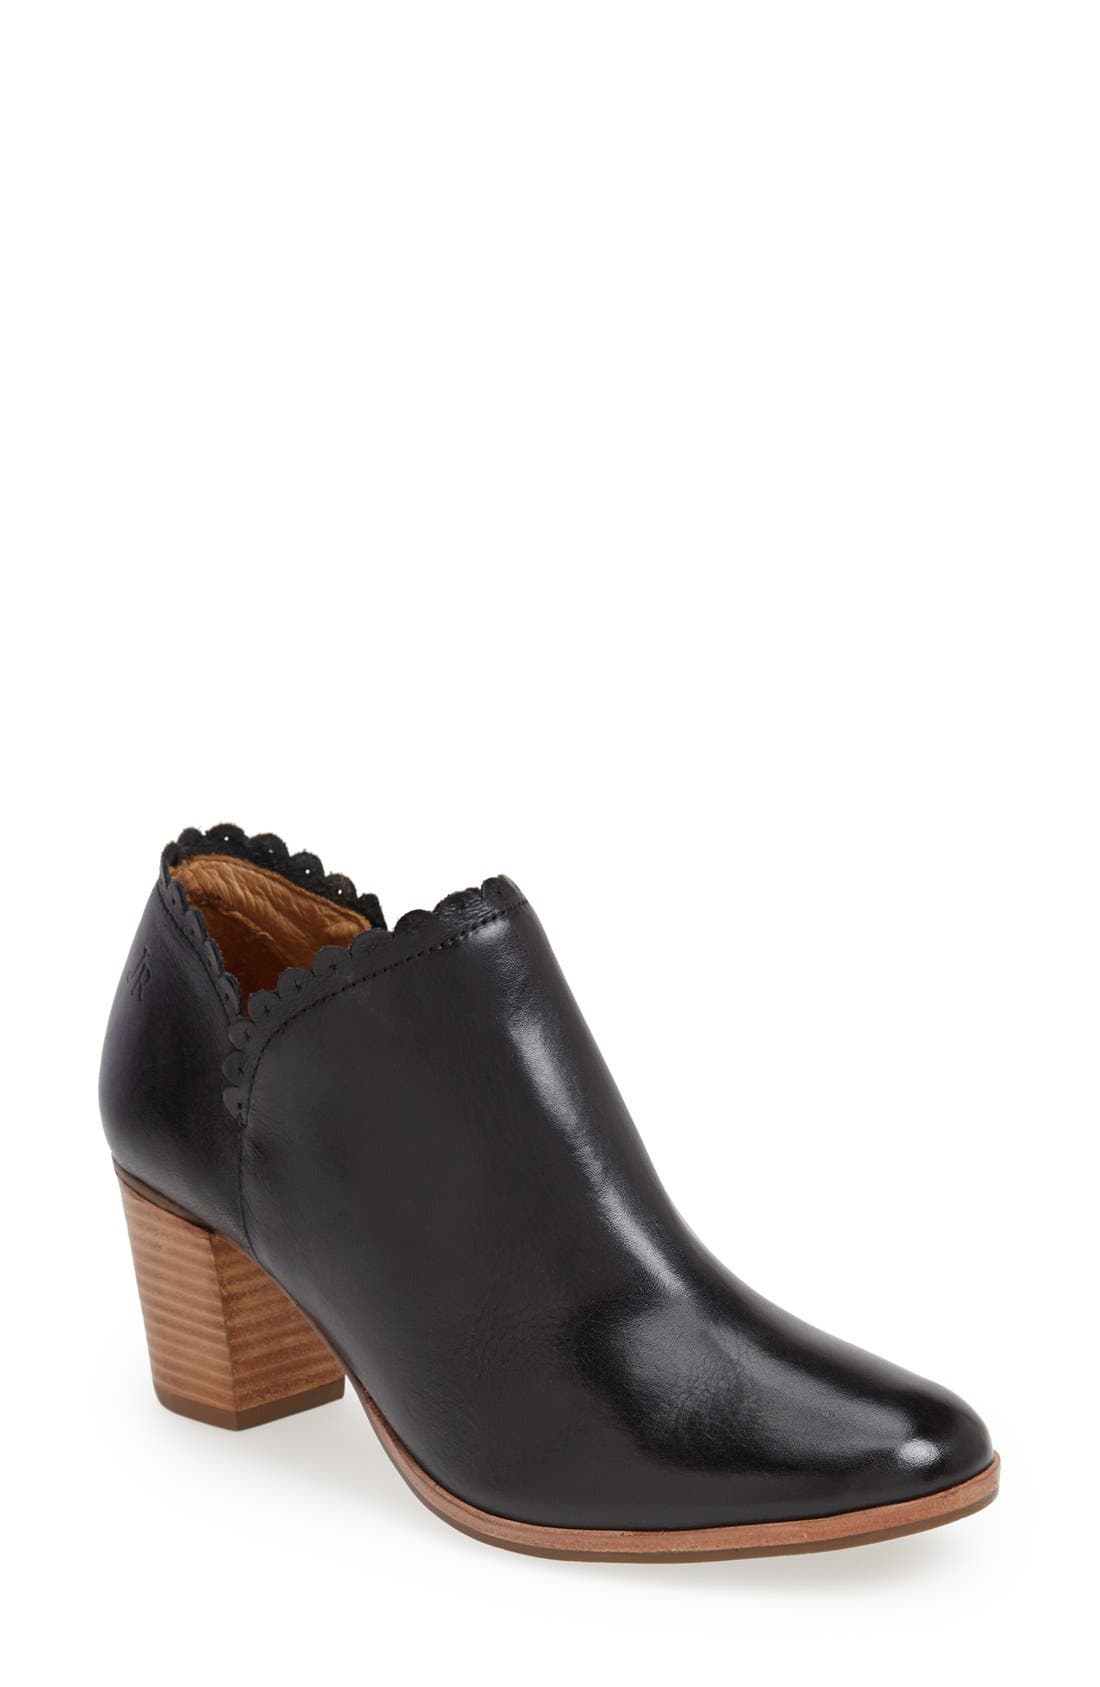 jack rogers marianne leather bootie